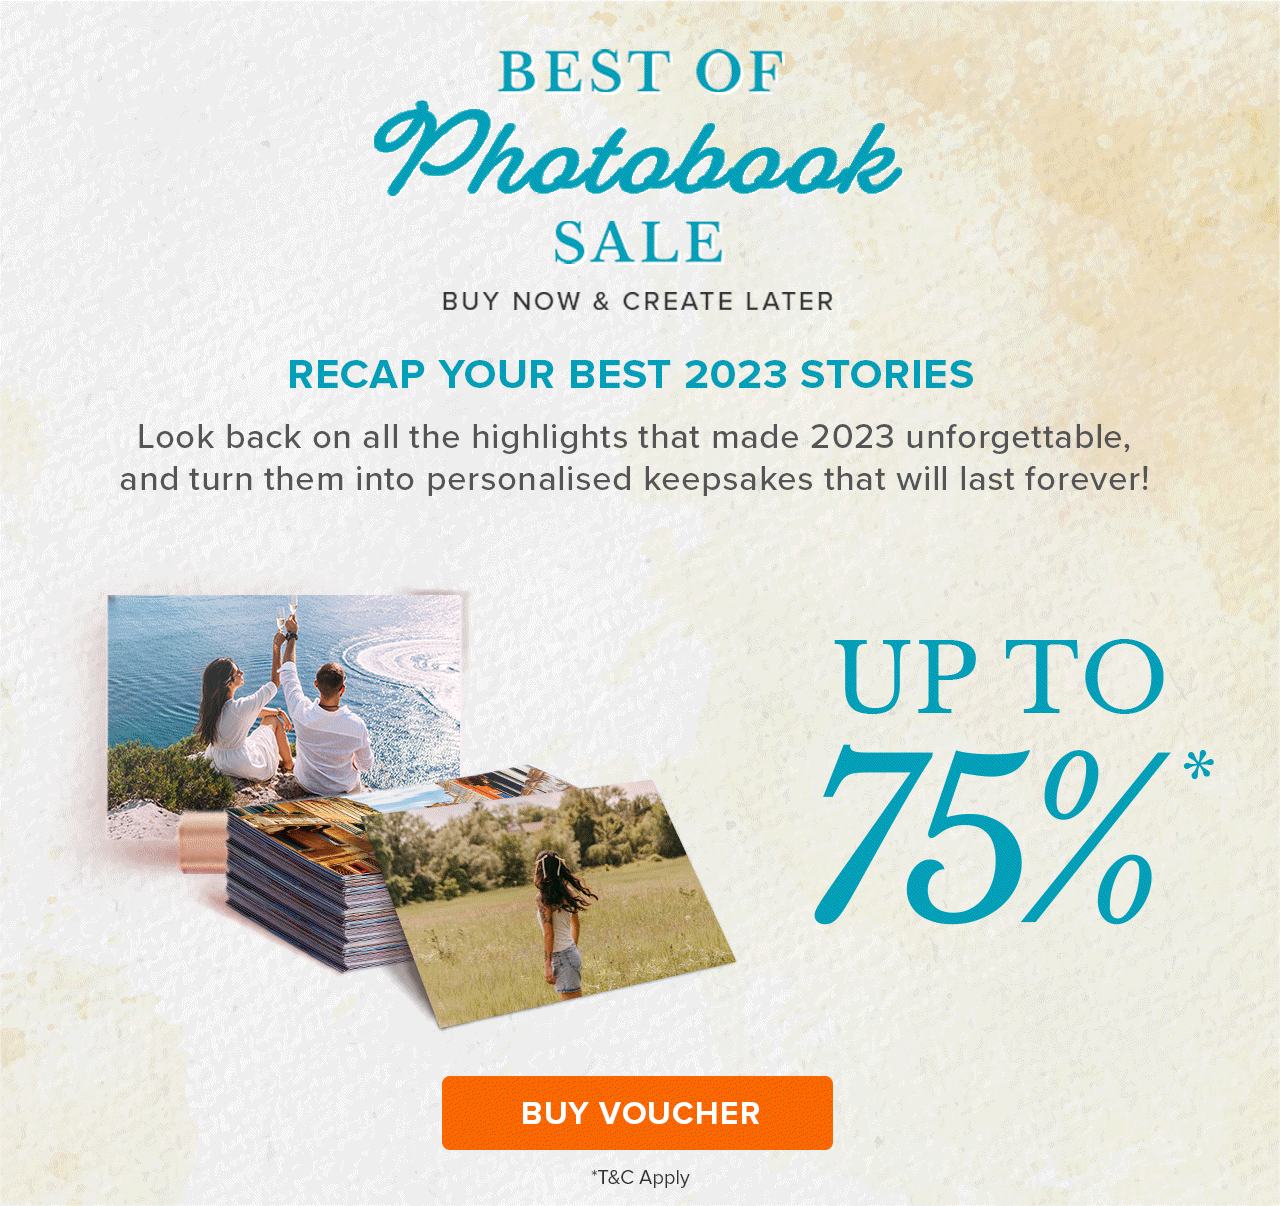 BEST OF PHOTOBOOK SALE | UP TO 75%